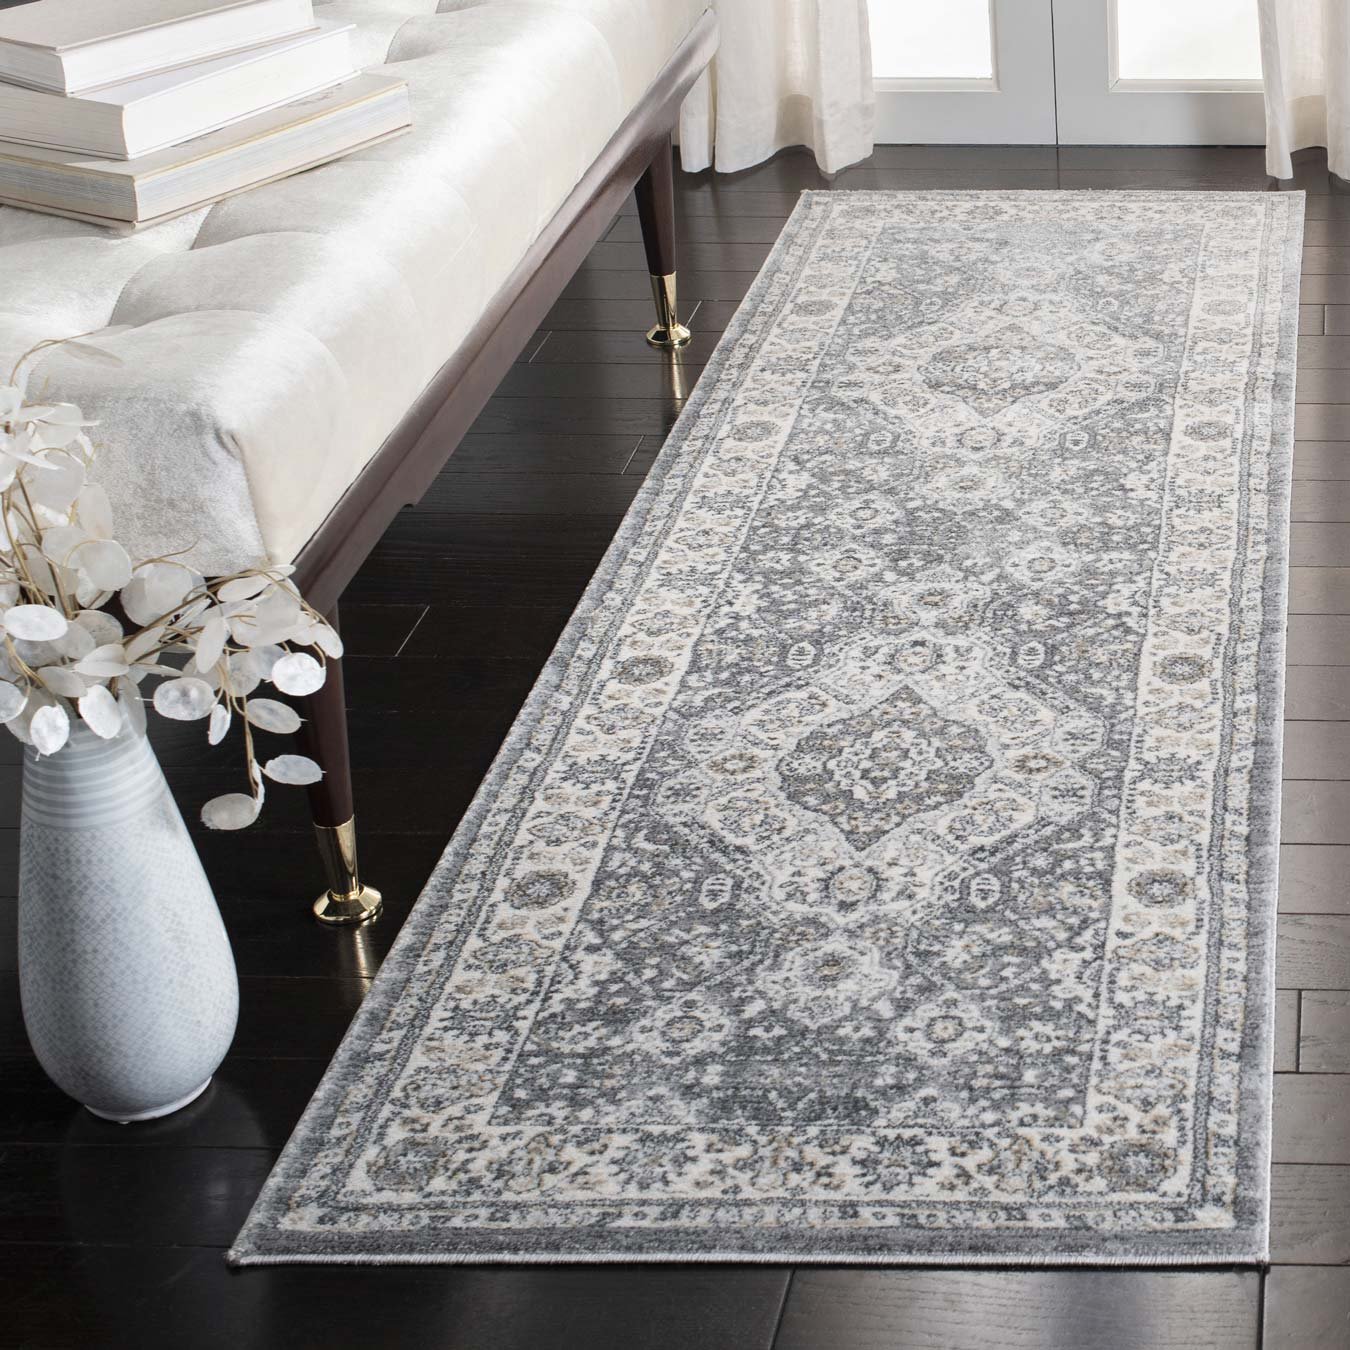 Stop Rugs Moving on Carpet : Effective Tips and Tricks